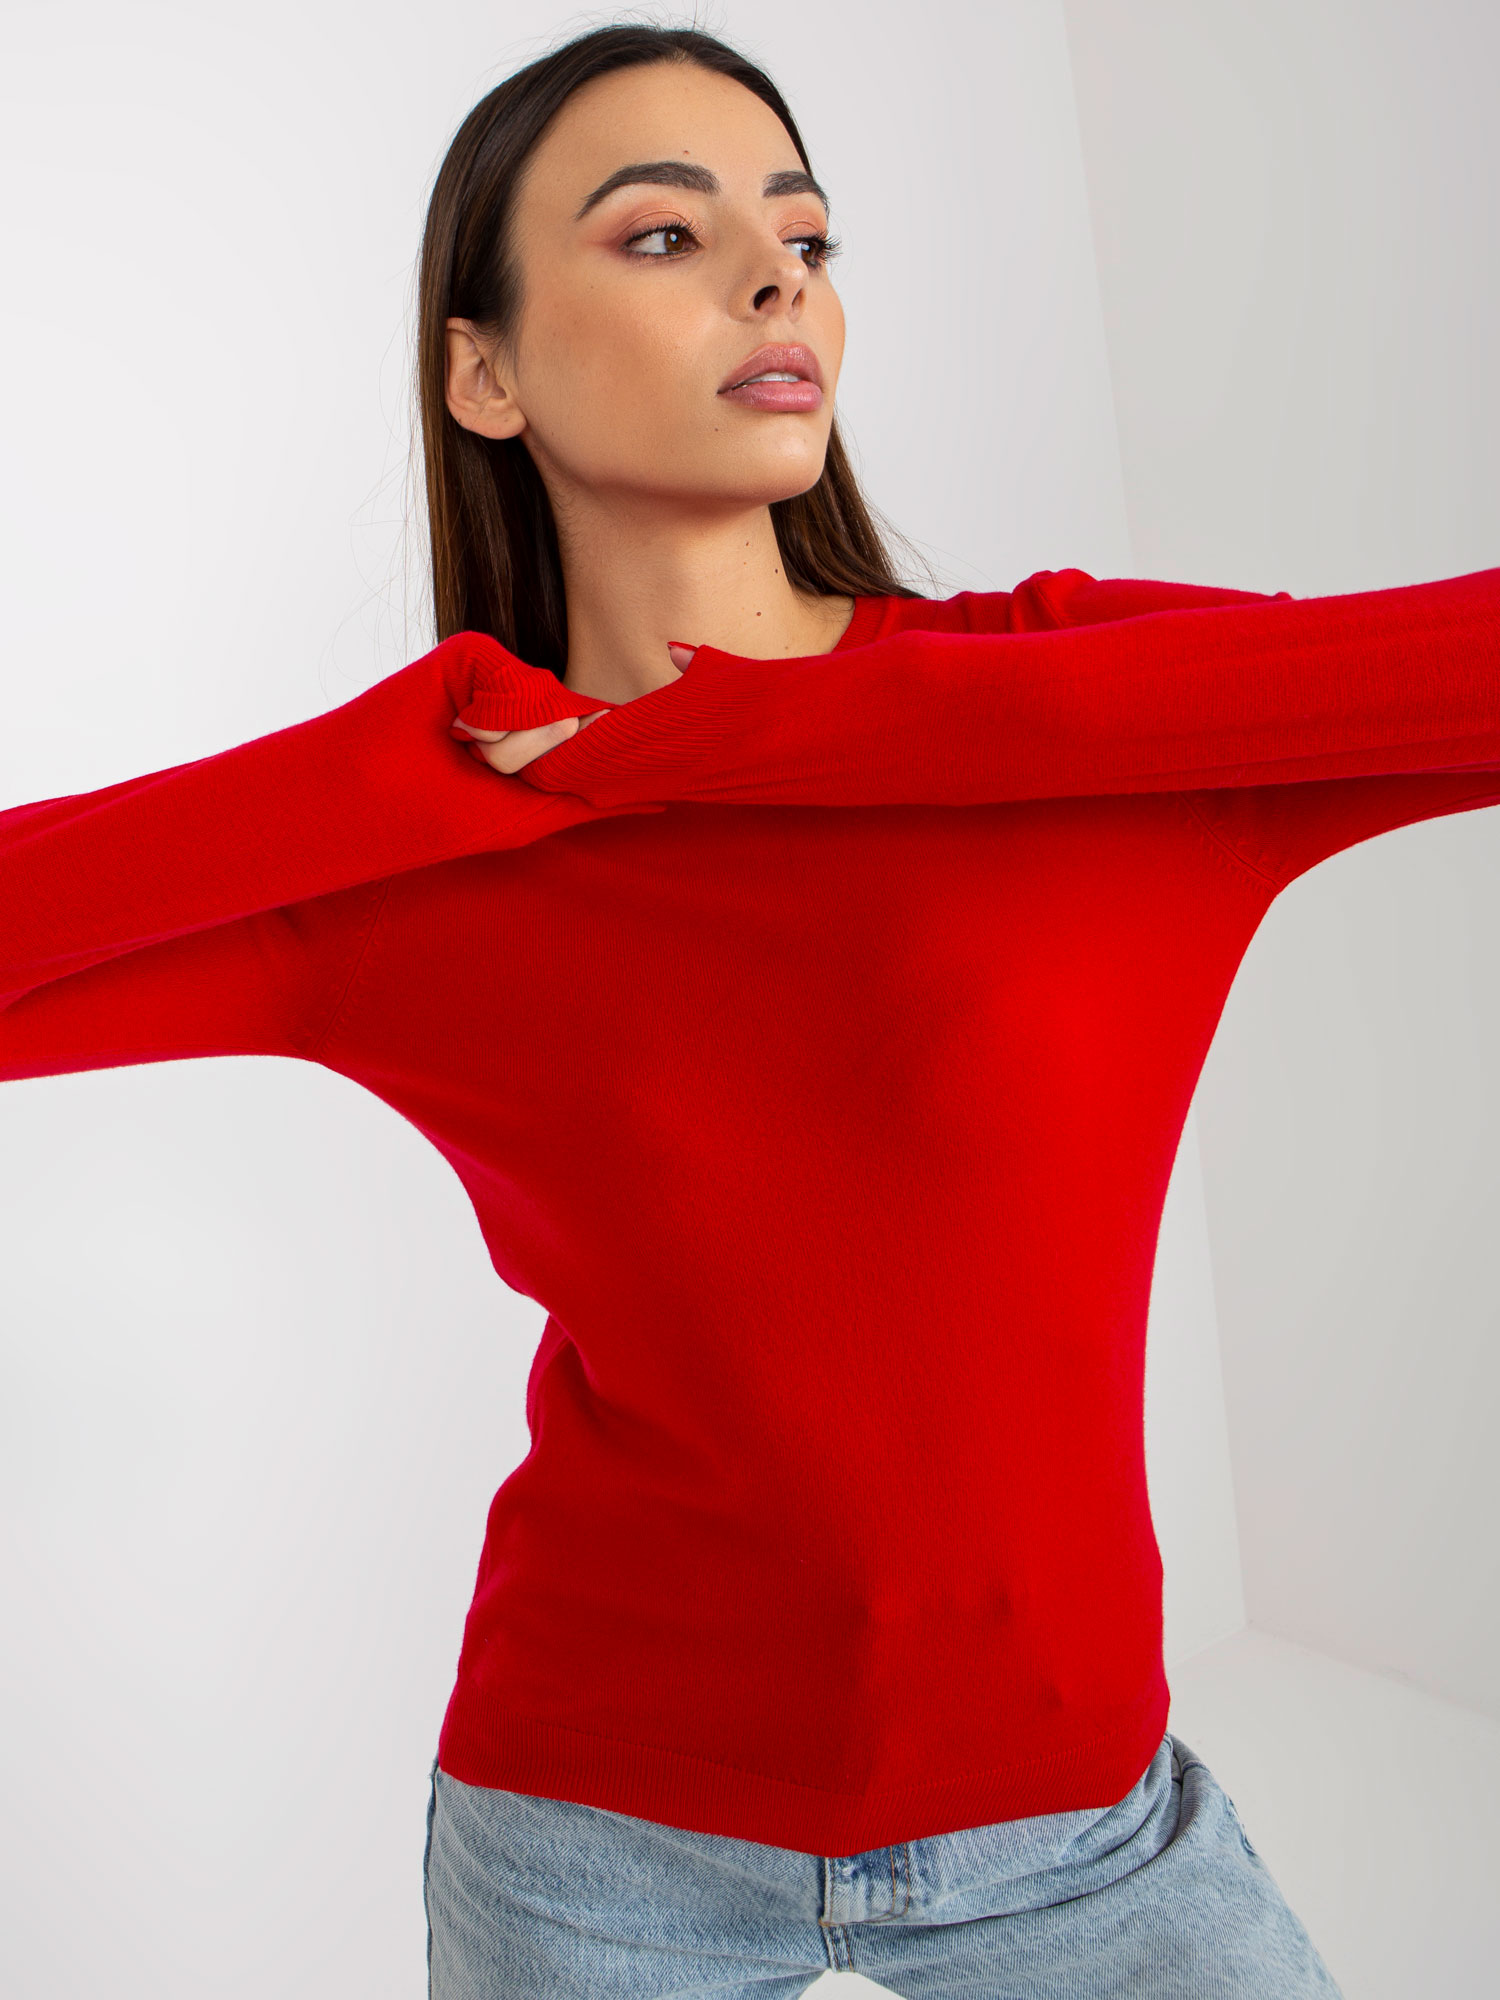 Red Women's Classic Sweater With A Round Neckline